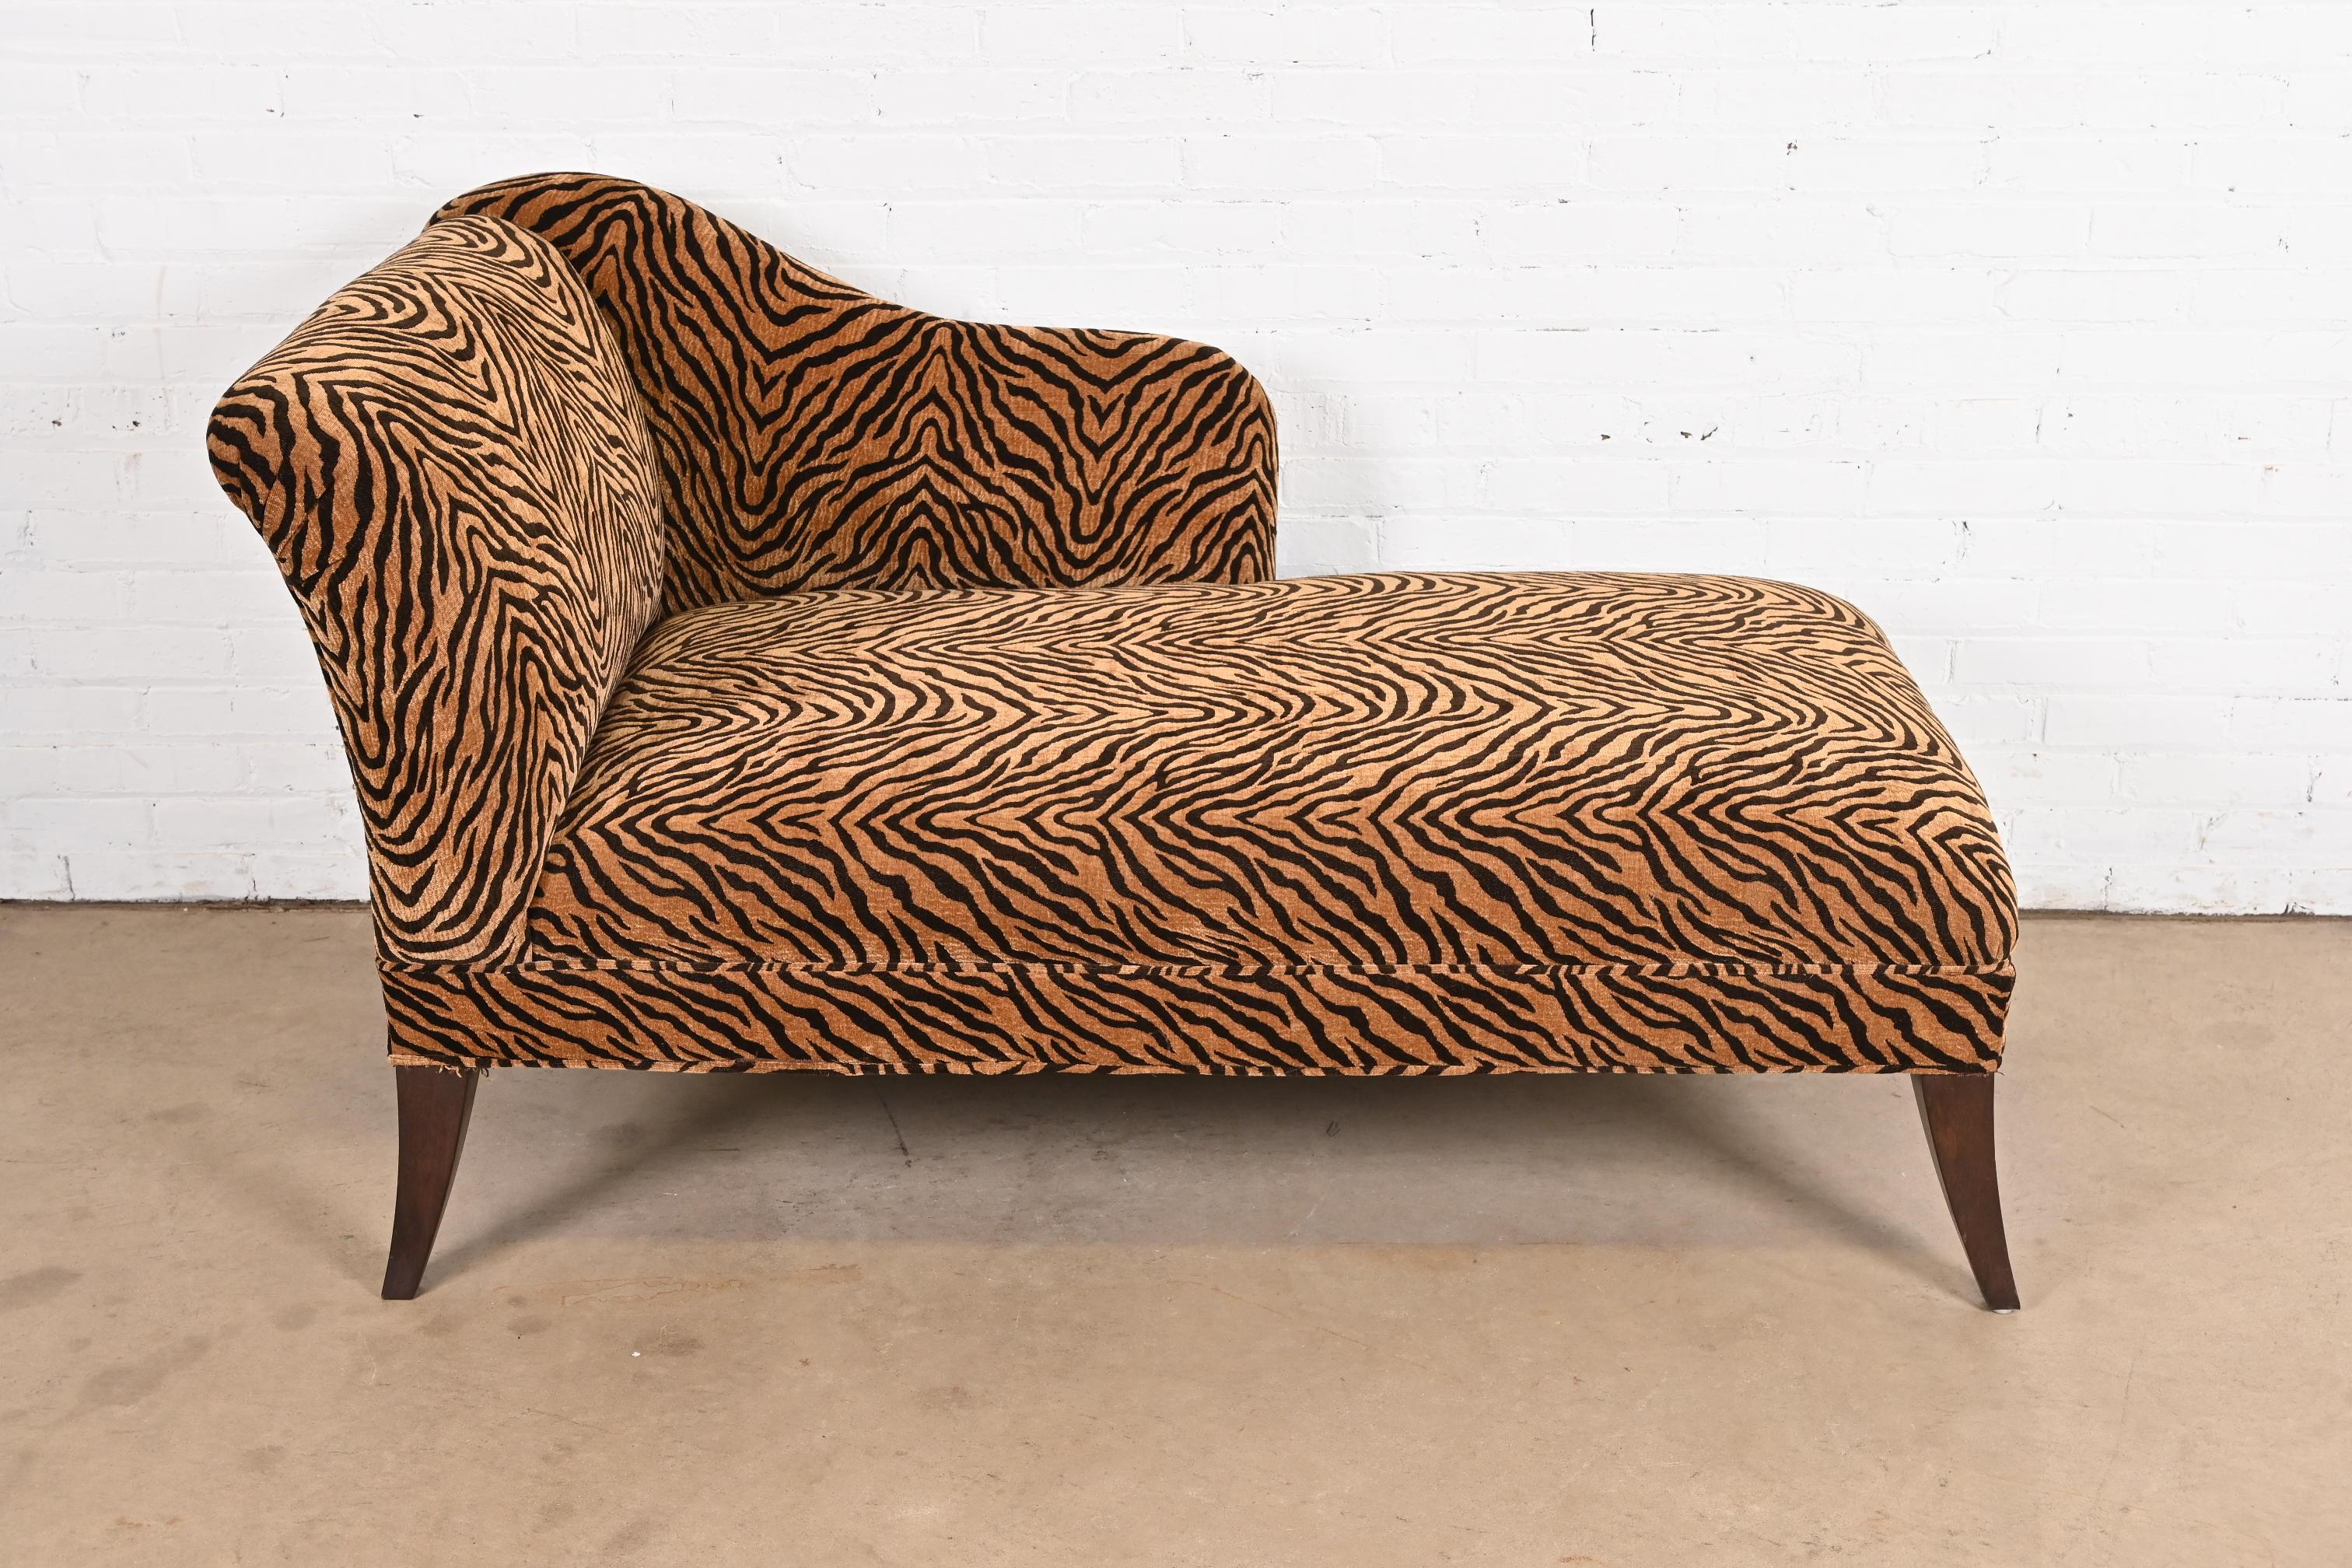 French Regency Tiger Print Upholstered Chaise Lounge For Sale 1